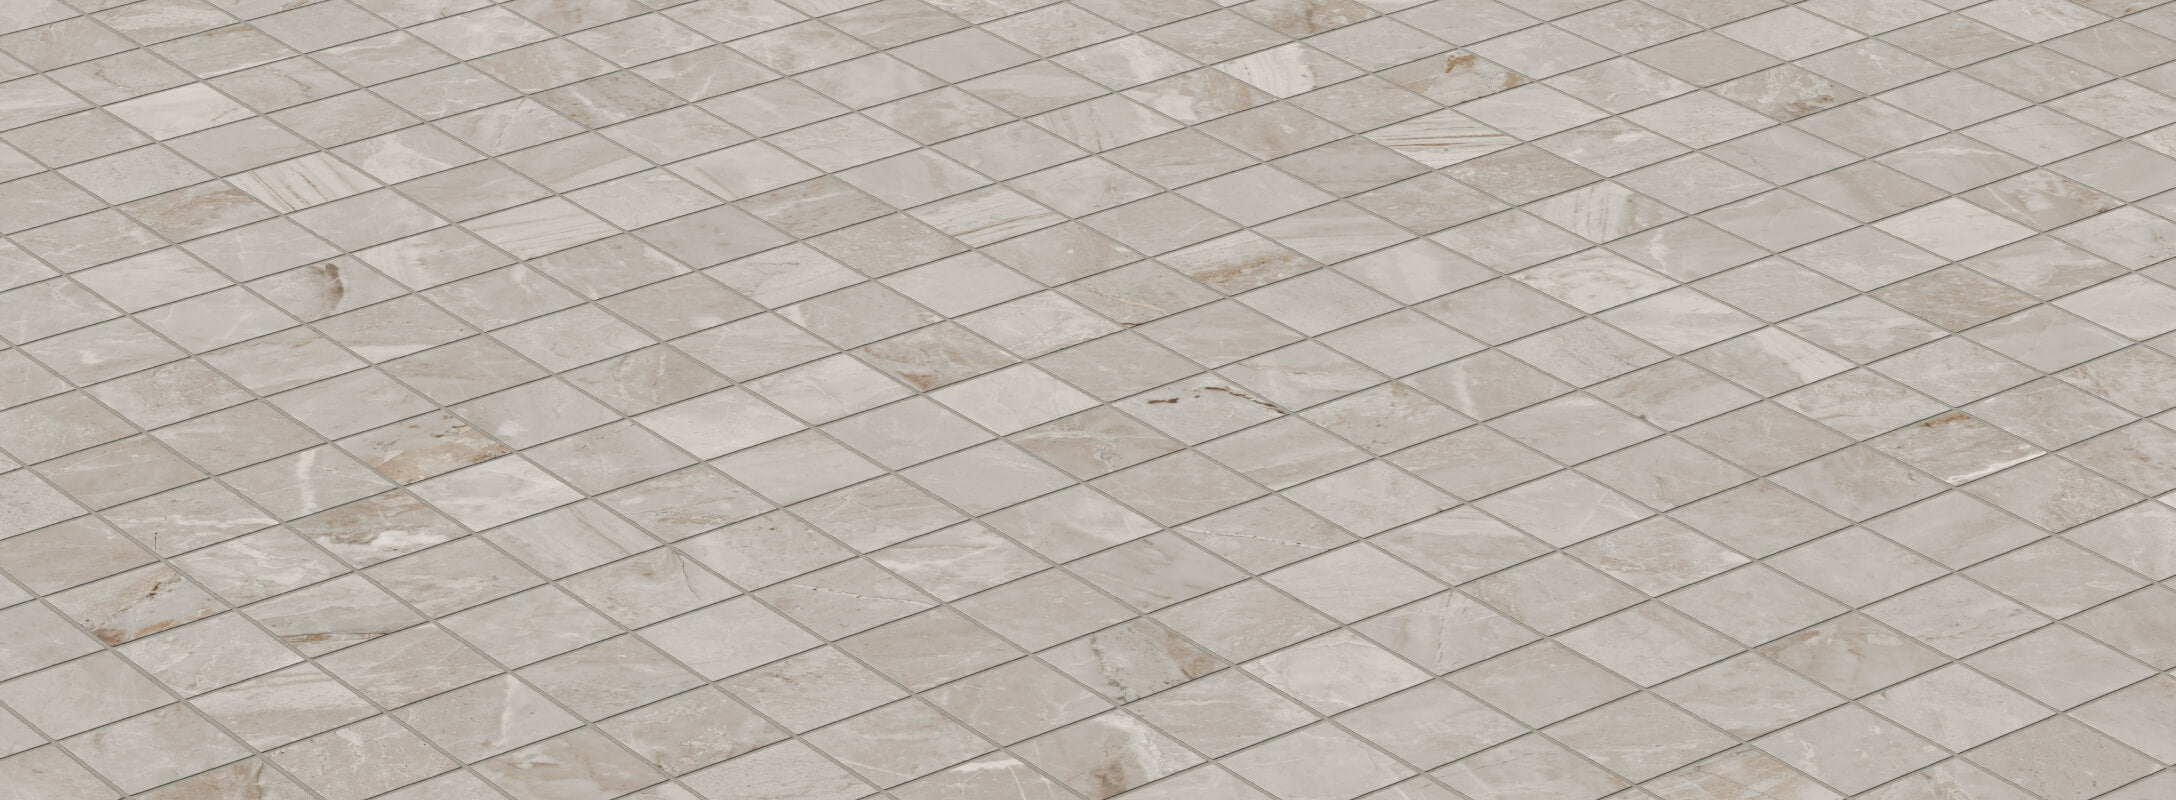 Taupe marble look cube mosaic tiles creating a sophisticated and elegant shower floor design.